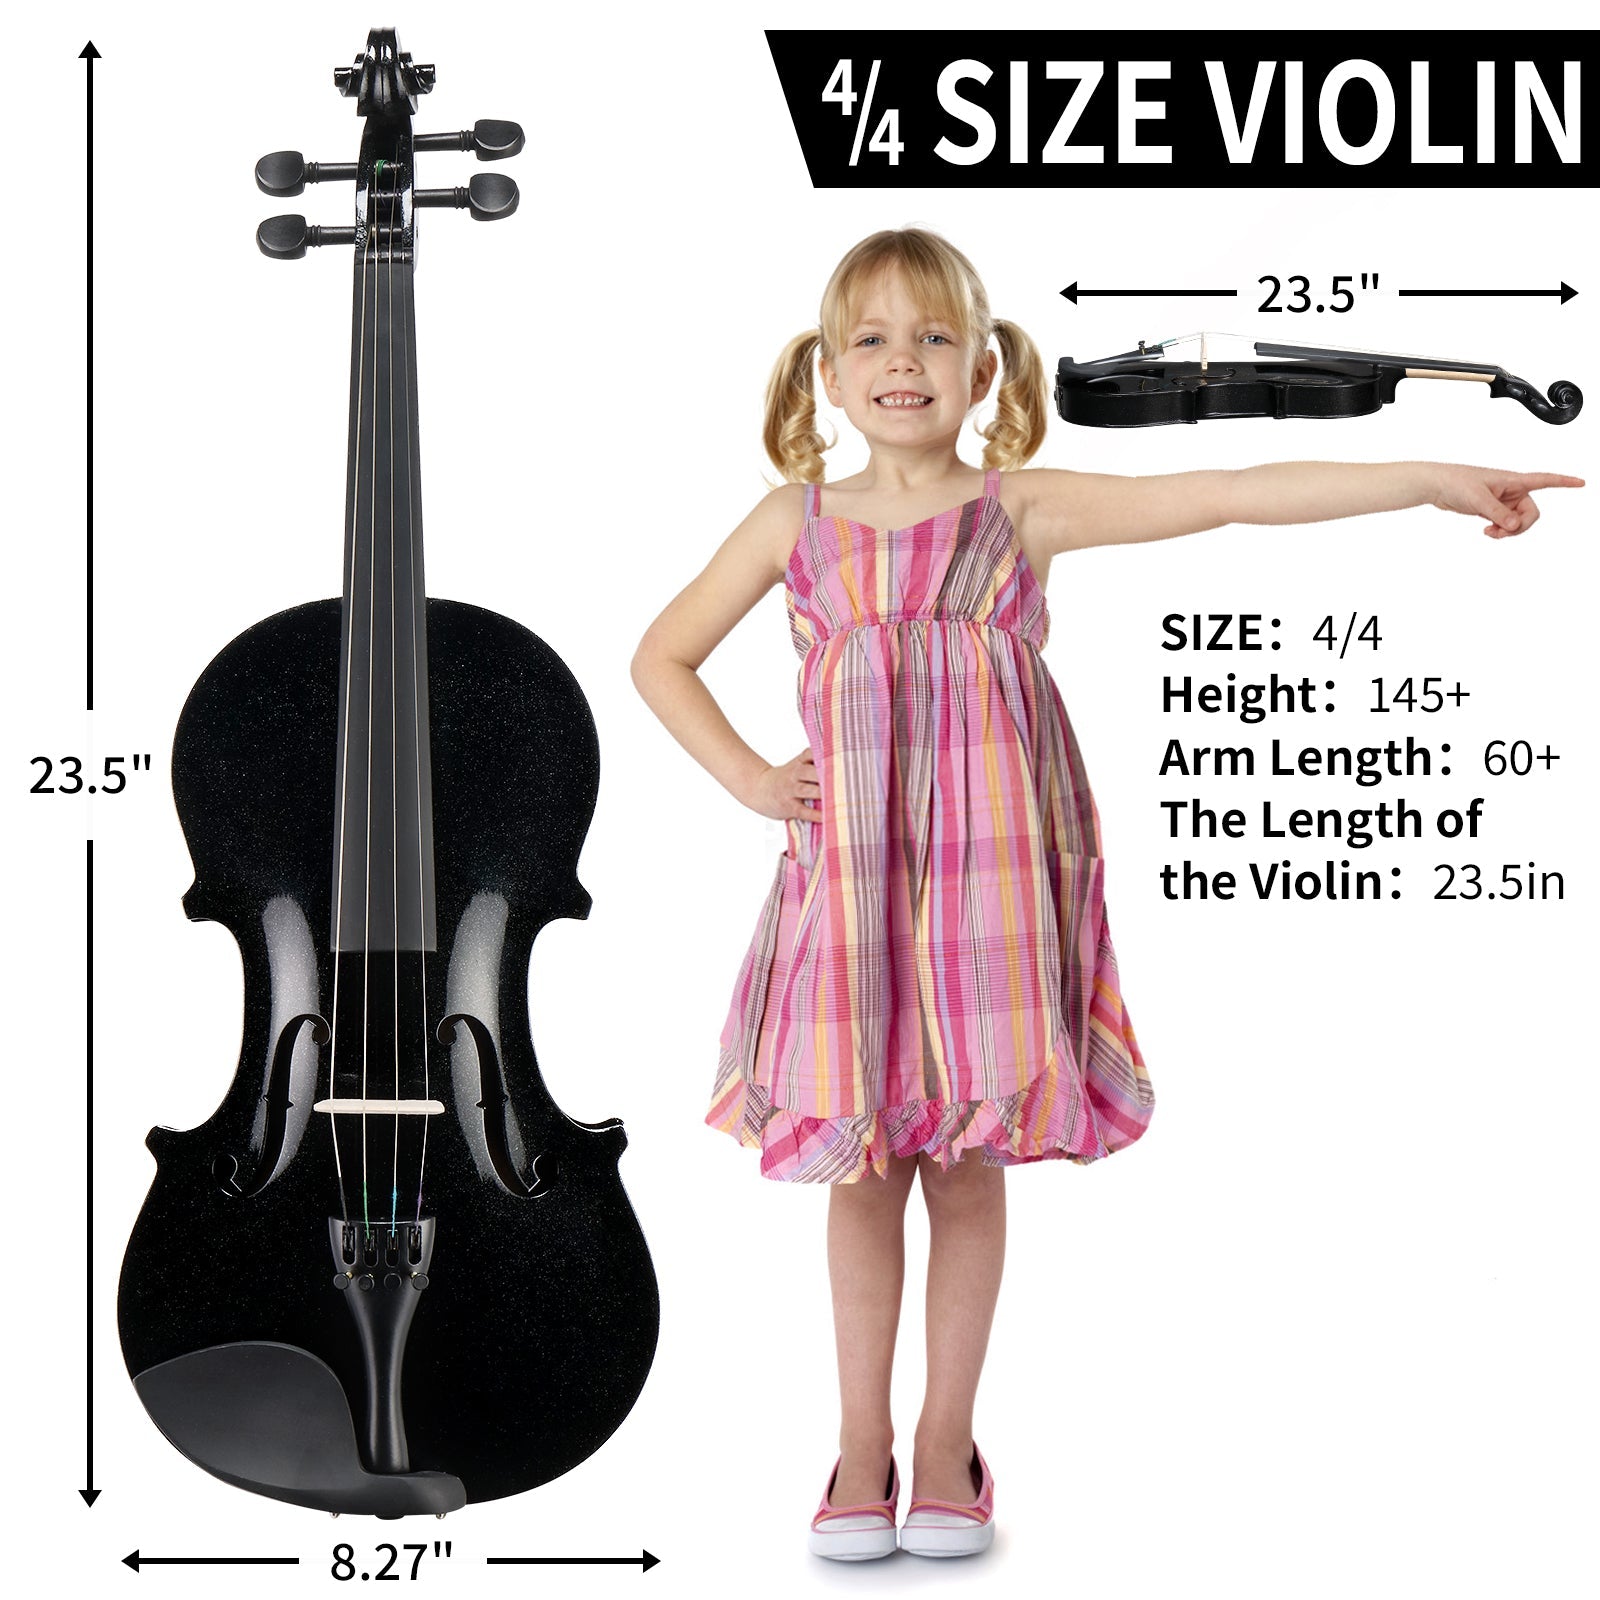 Full Size 4/4 Violin Set for Adults Beginners Students with Hard Case, Violin Bow, Shoulder Rest, Rosin, Extra Strings and Sordine